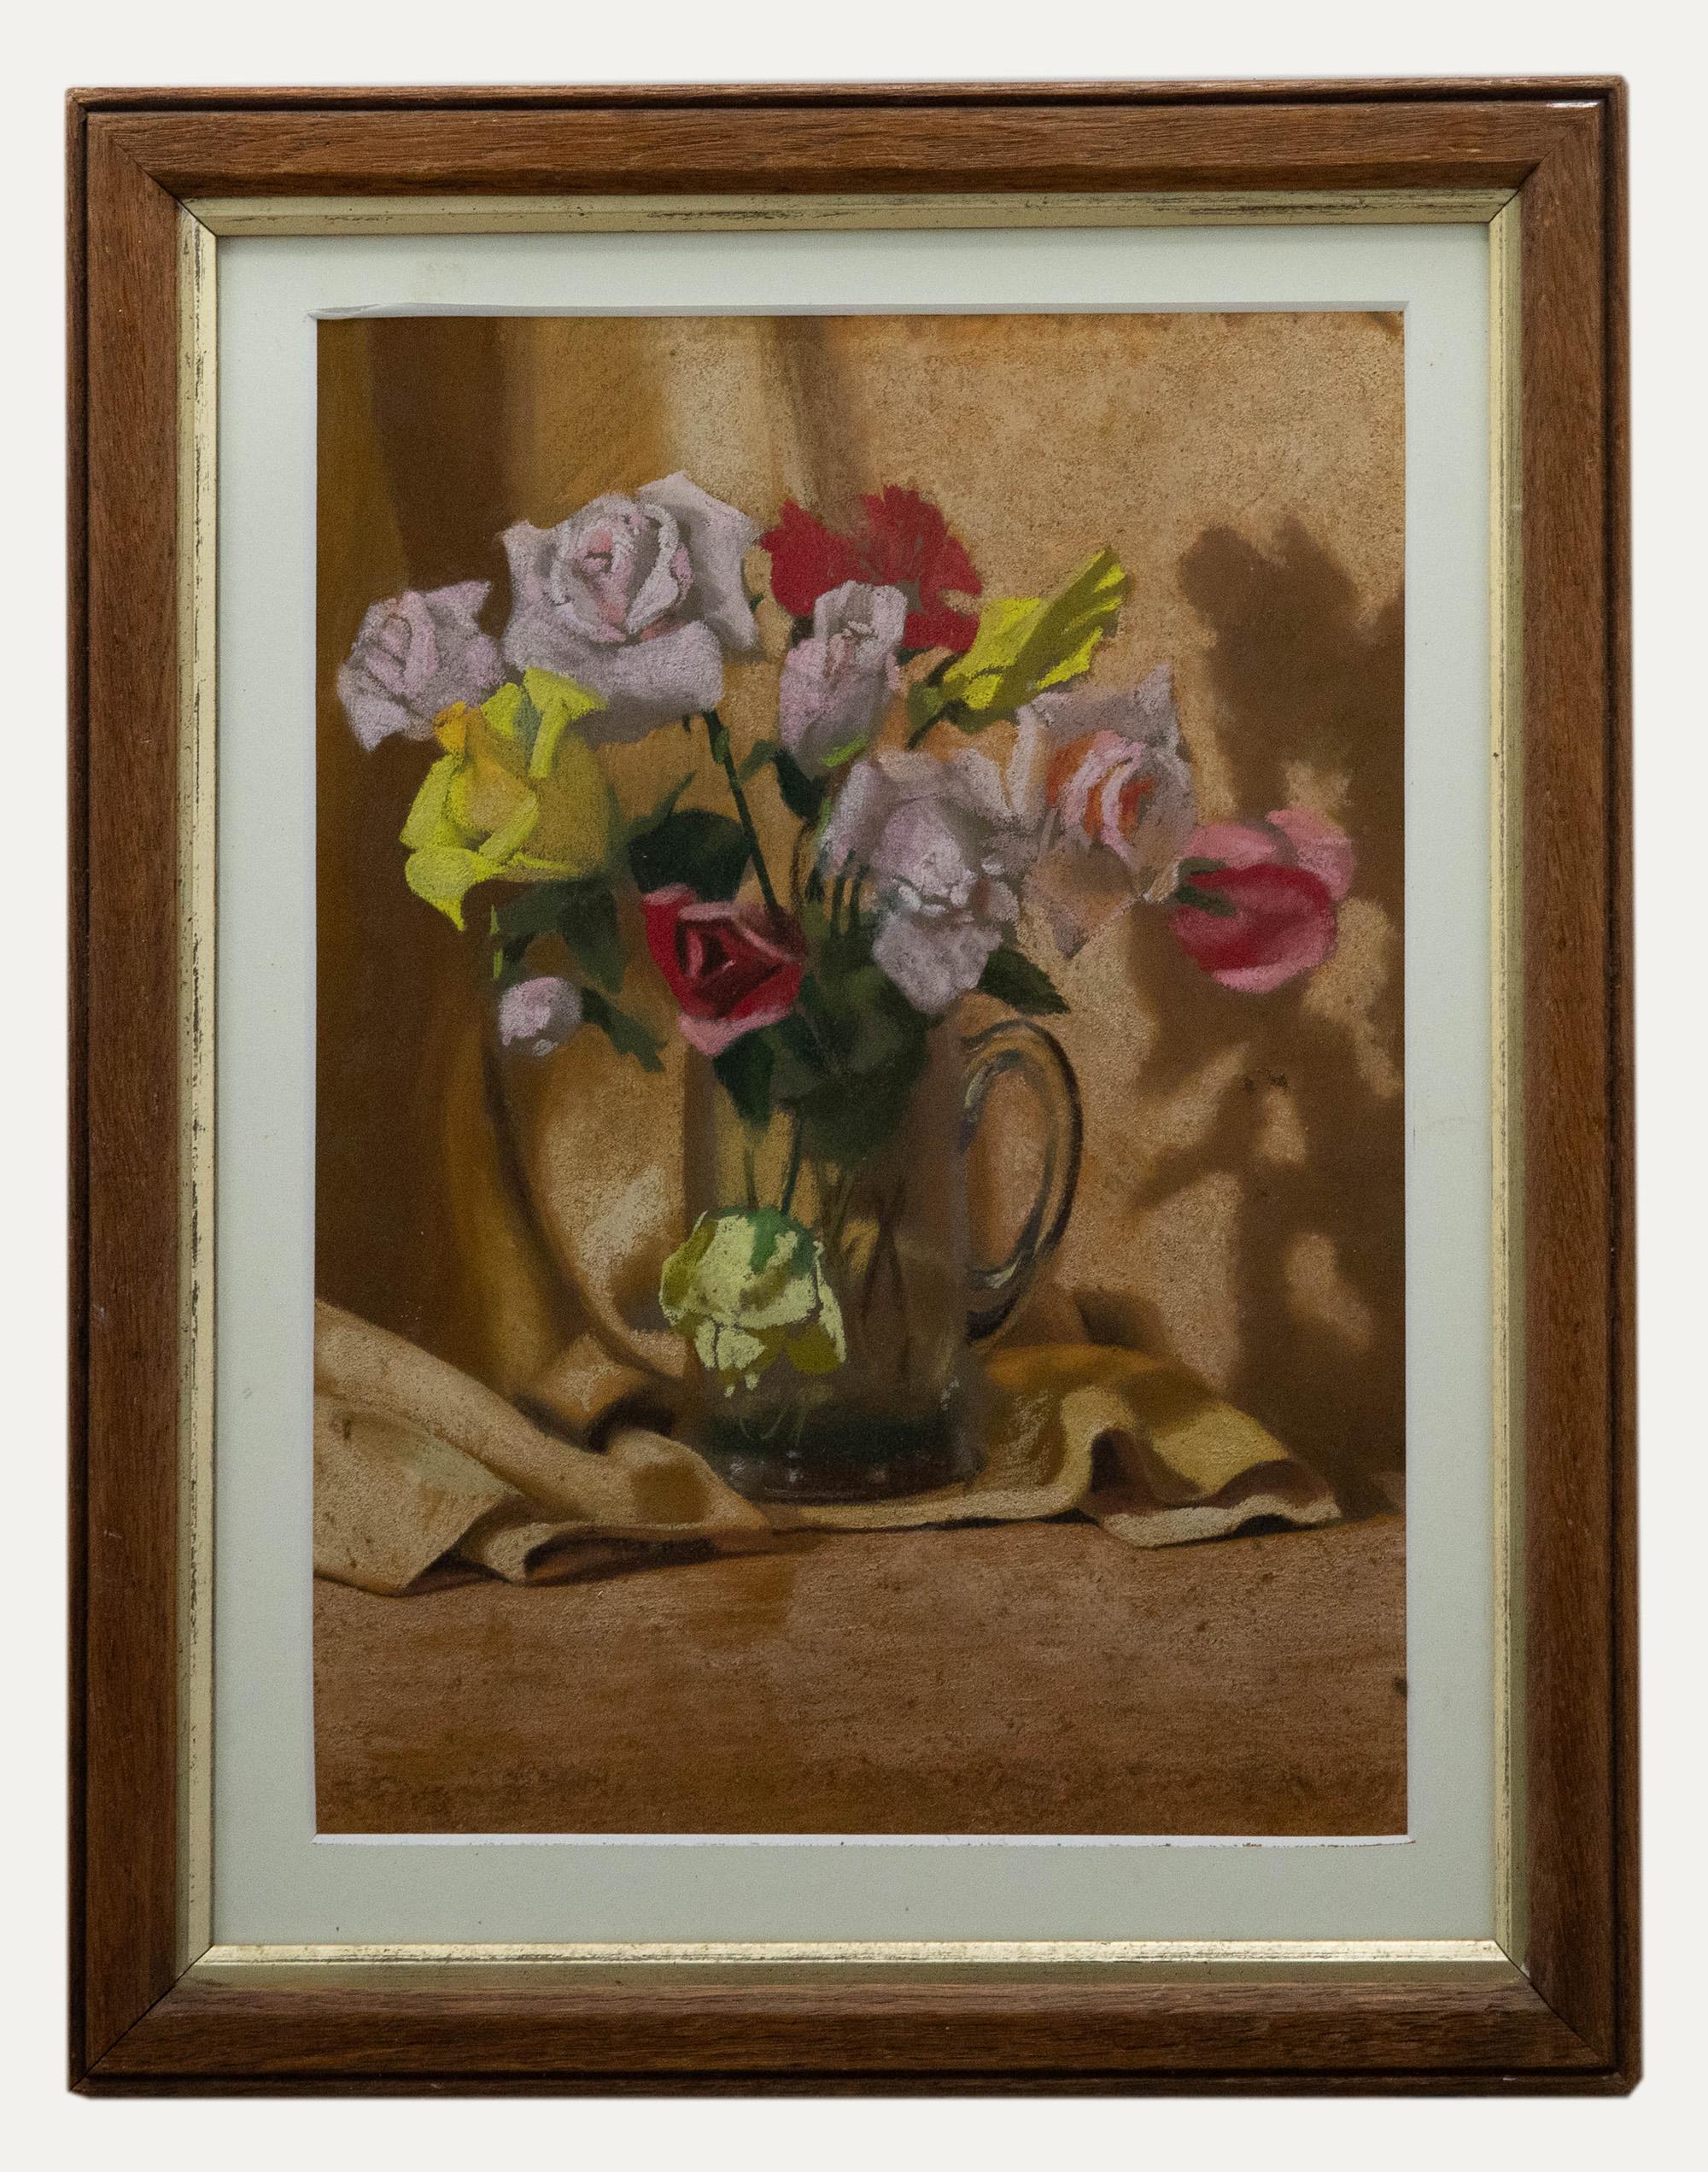 A fine still life in pastel by the artist Vivian Bewick. Unsigned. Well presented in a vintage oak frame and inner gilt slip, with narrow card mount. On paper. 